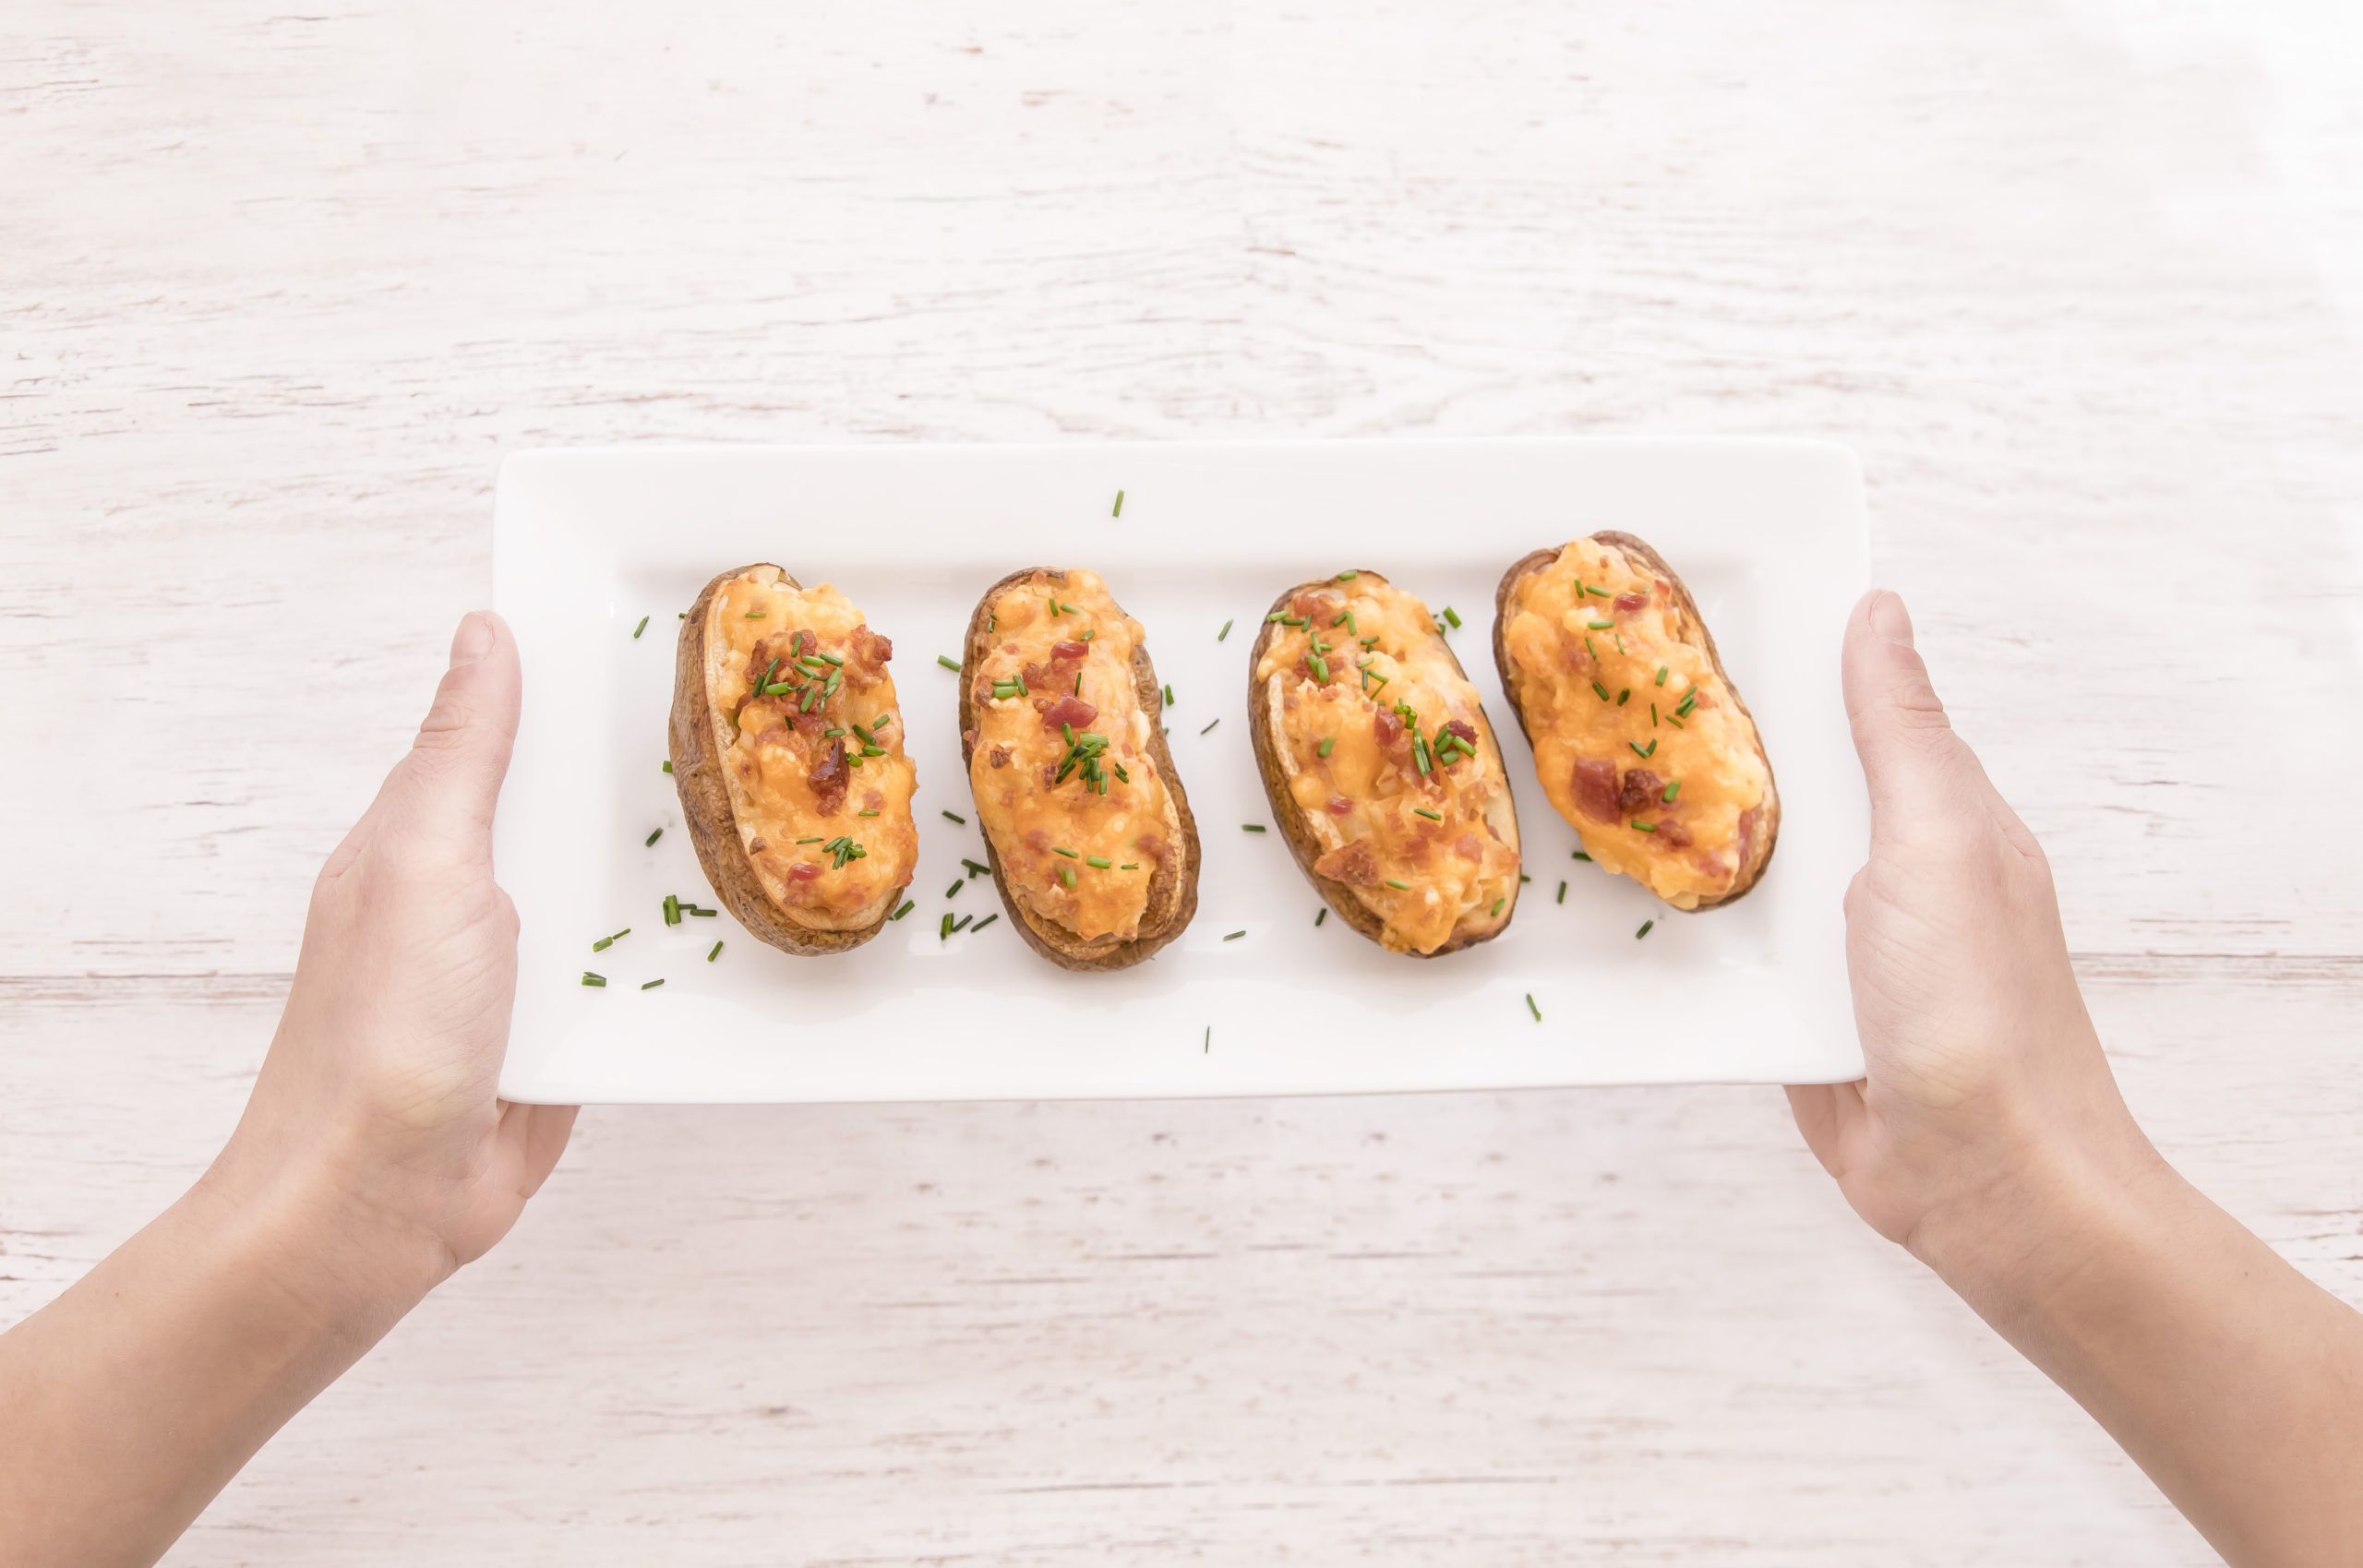 Pancetta and Aged Cheddar Twice-Baked Potatoes